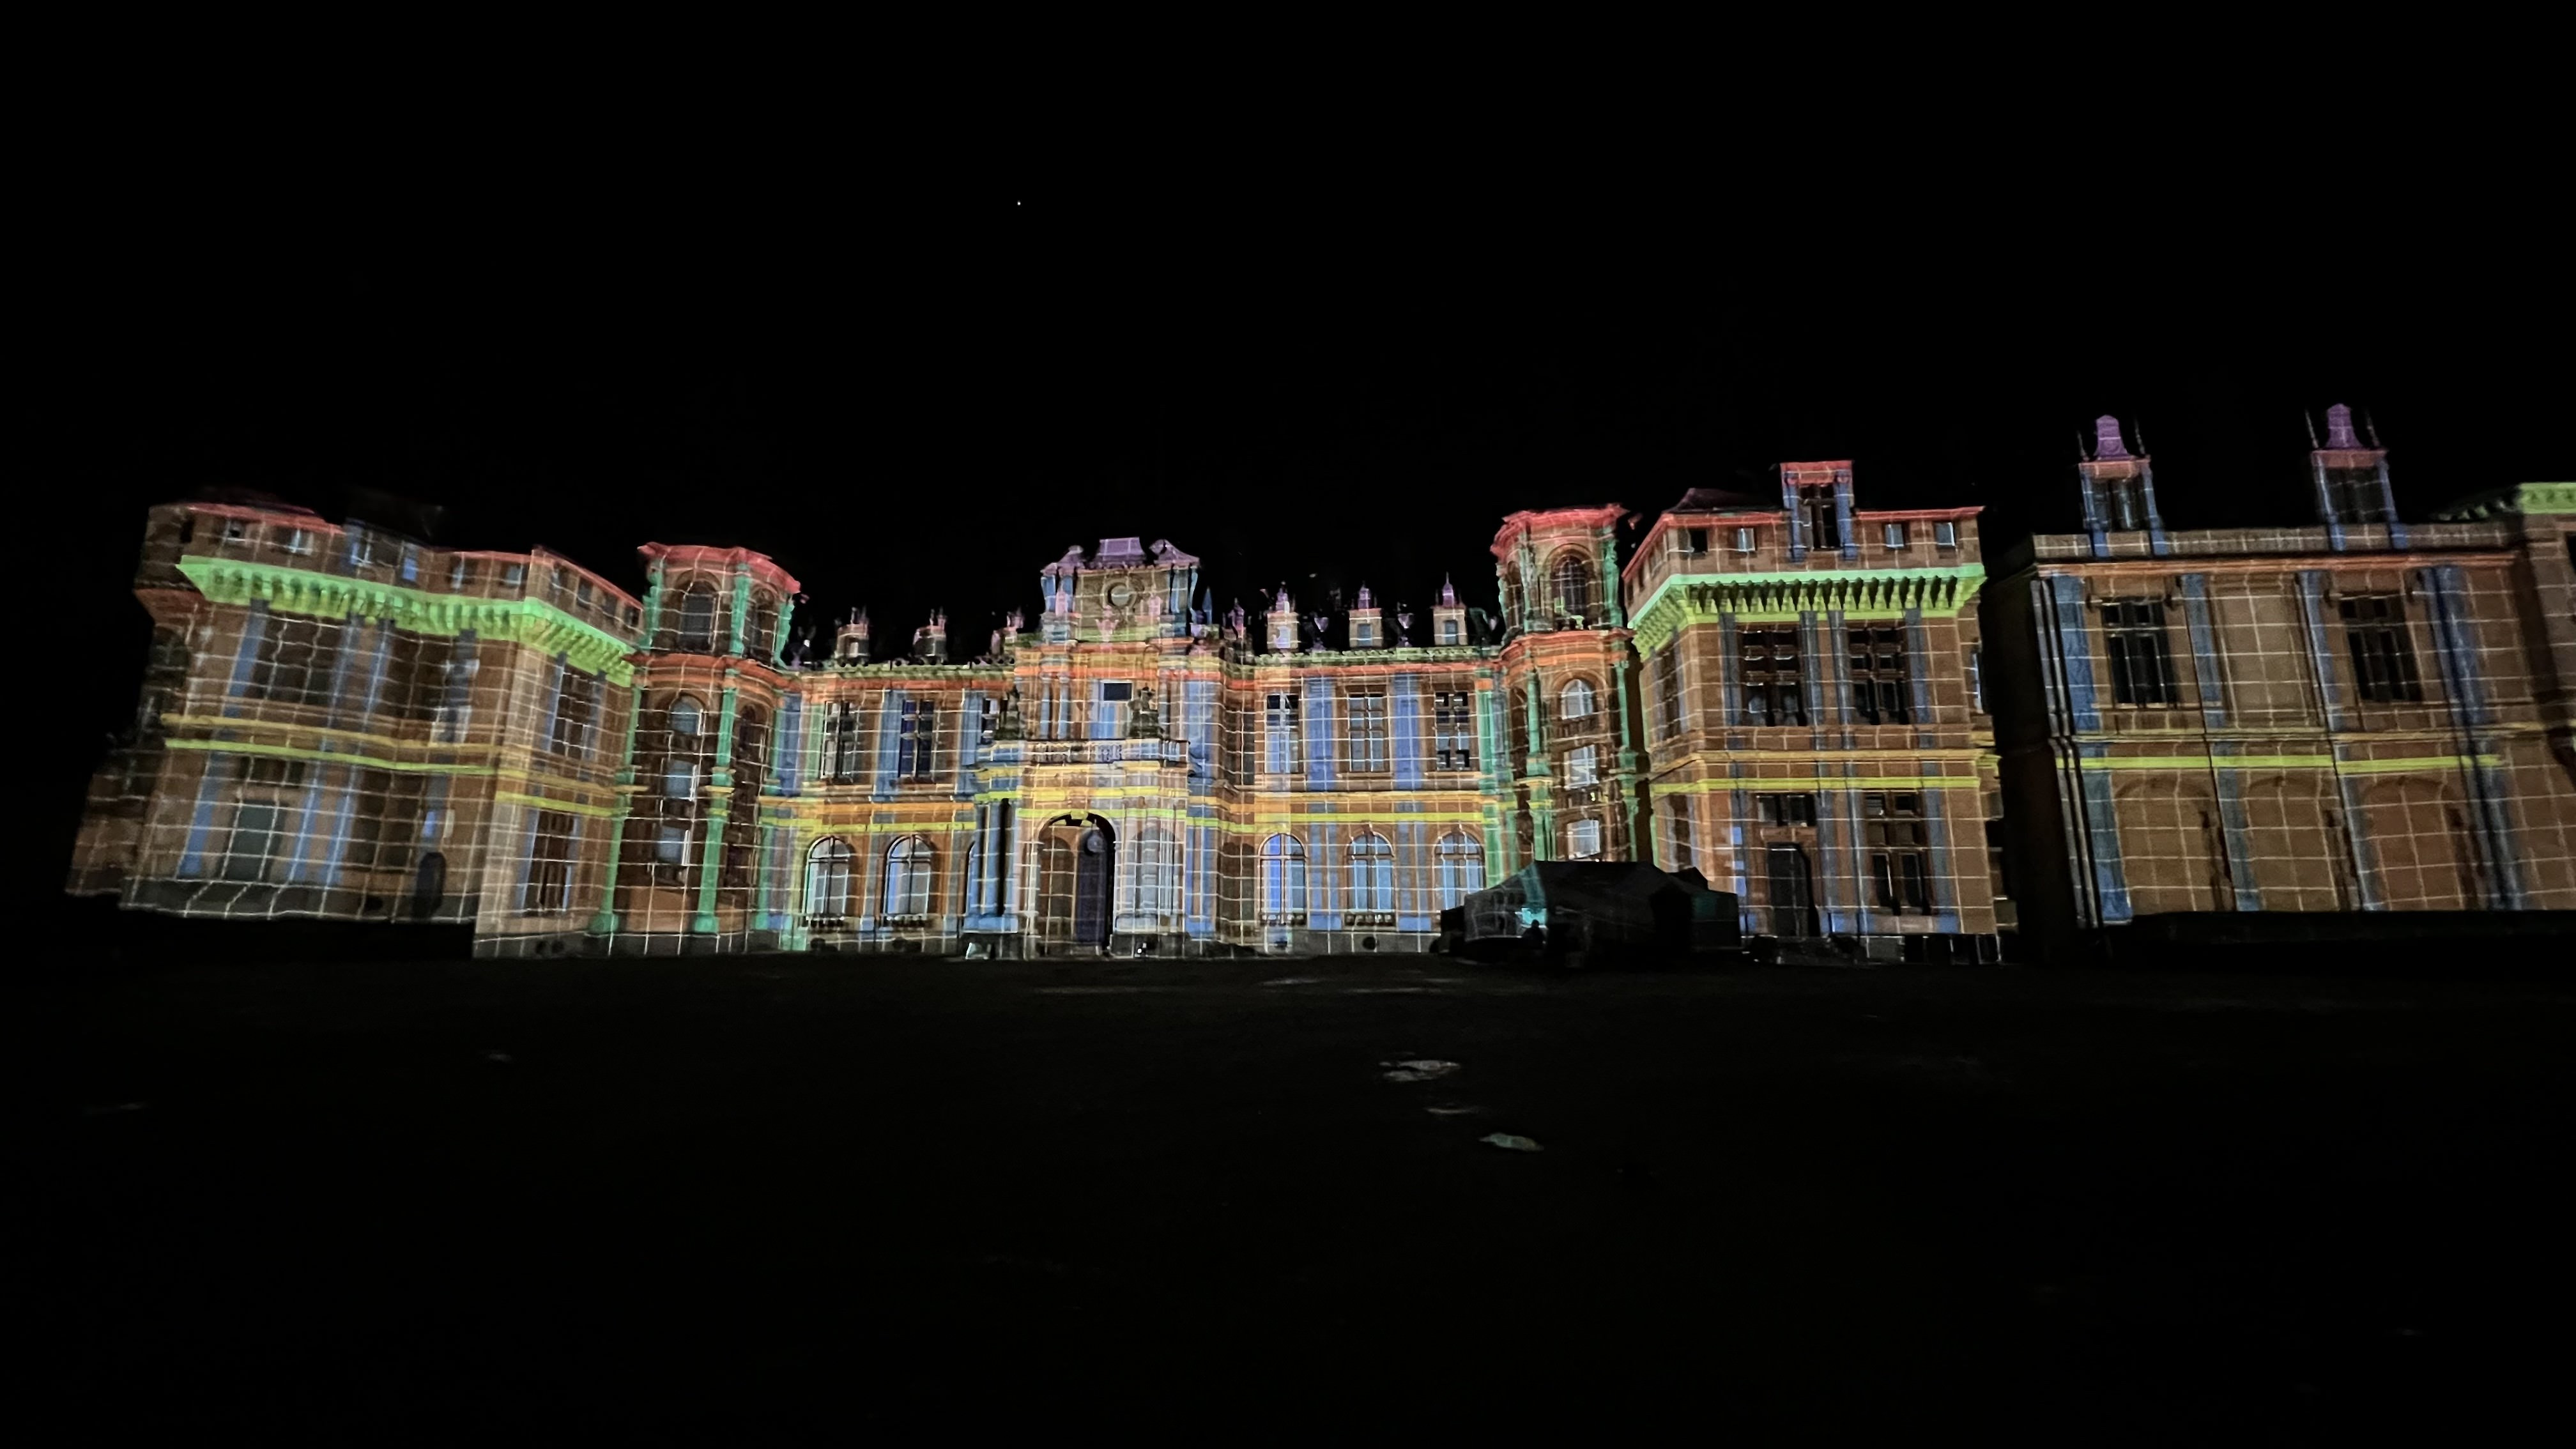 Photo of Waddesdon Manor with a image mapping grid projected on it.
Photo taken by Stuart Burdett